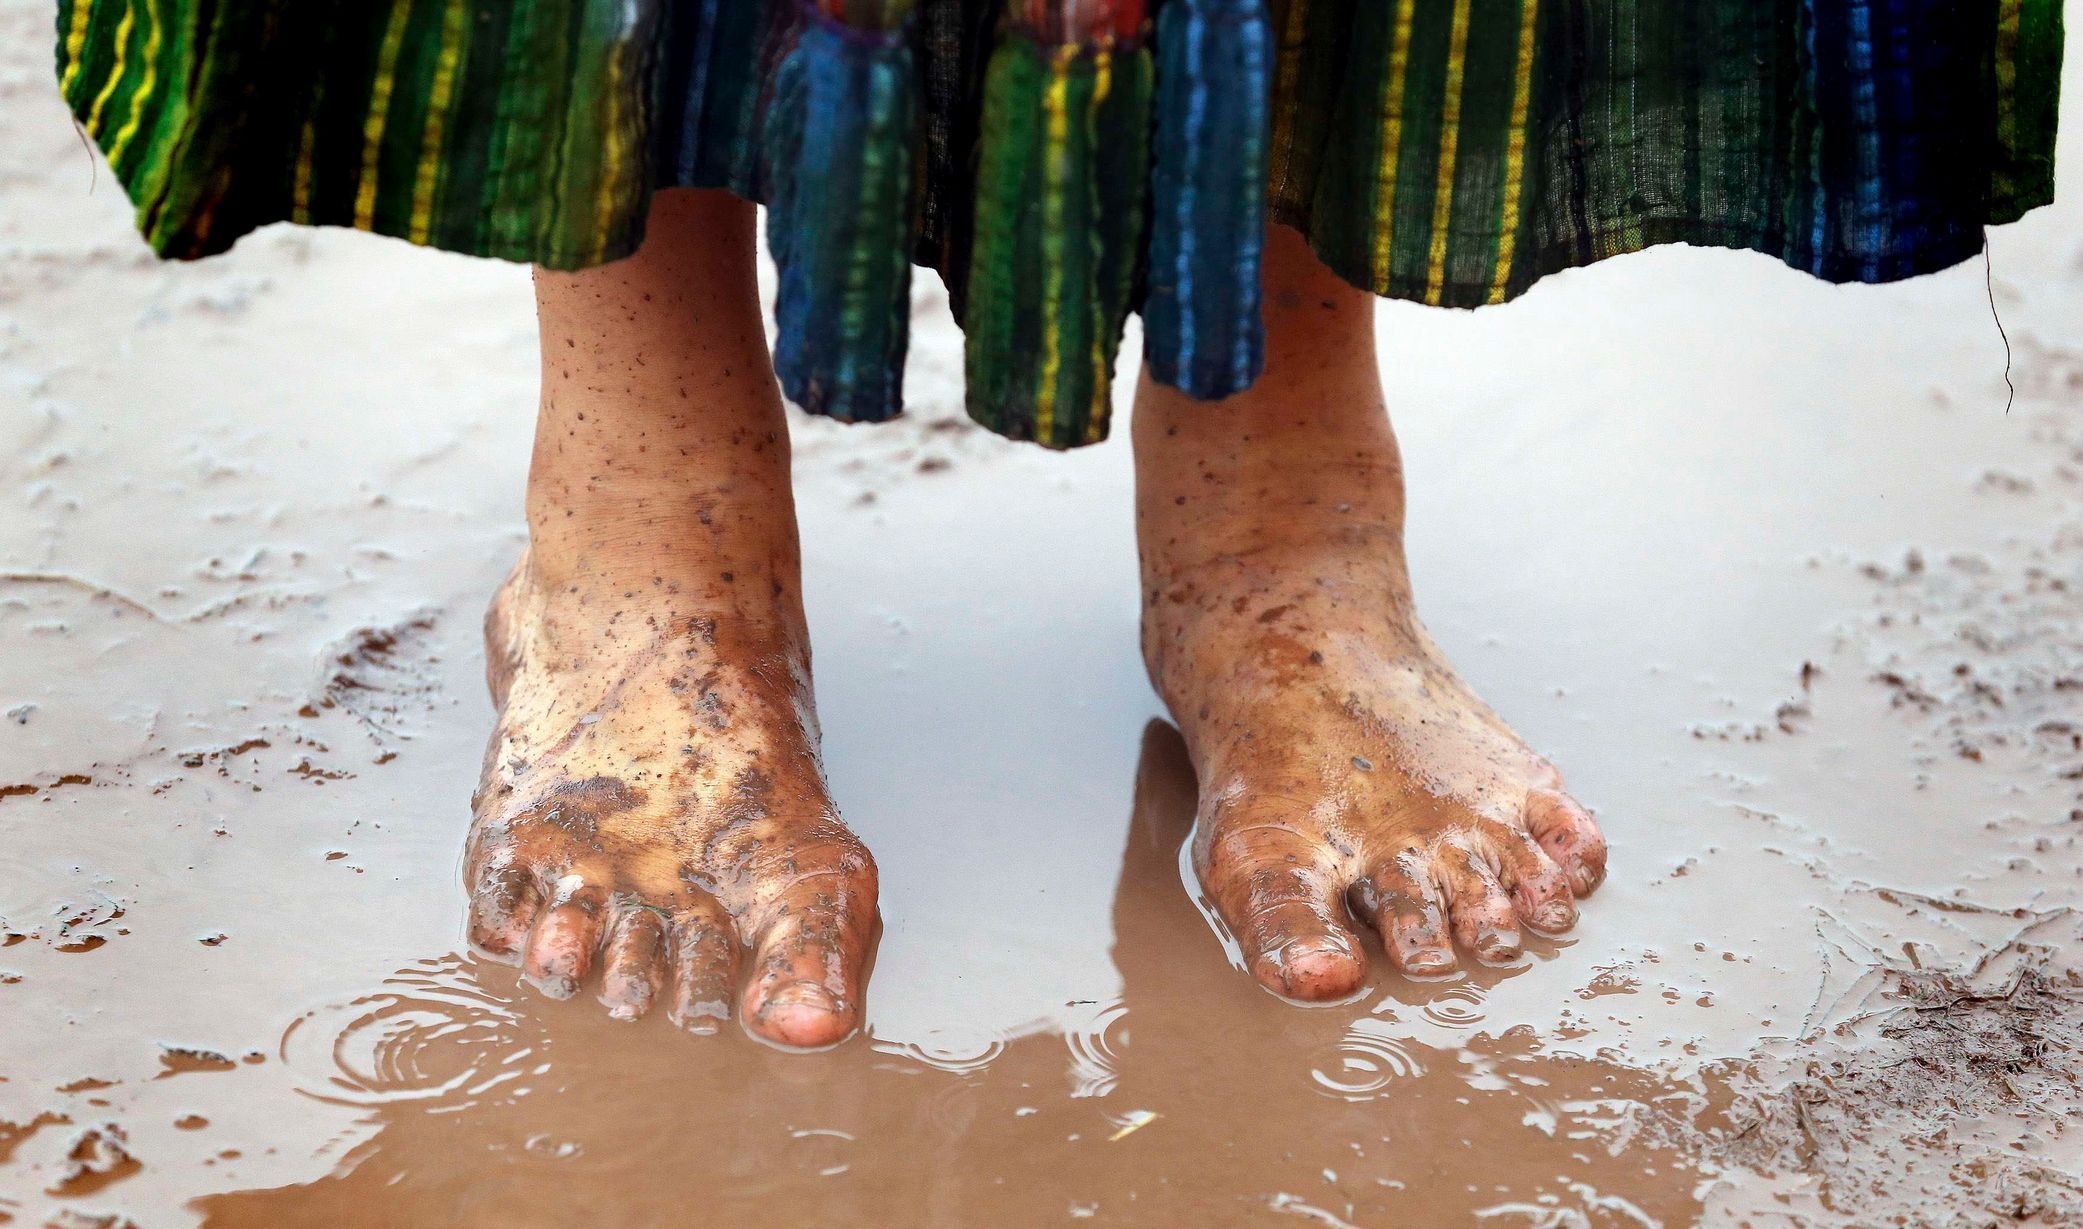 A festival goer stands barefoot in a muddy puddle at Worthy Farm in Somerset, on the third day of the Glastonbury music festival